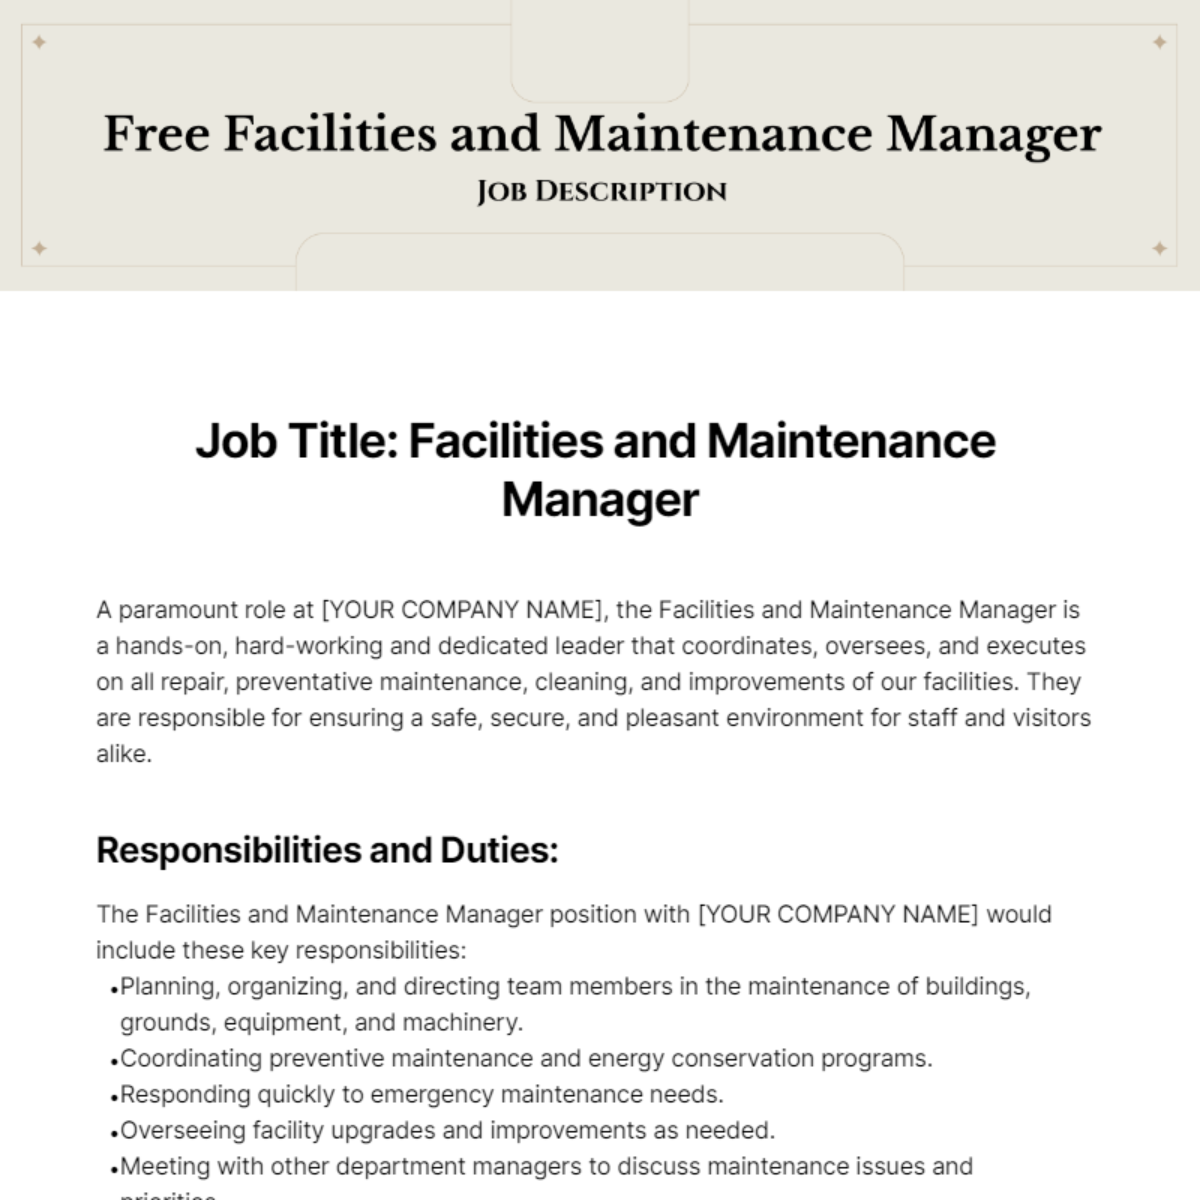 Free Facilities and Maintenance Manager Job Description Template